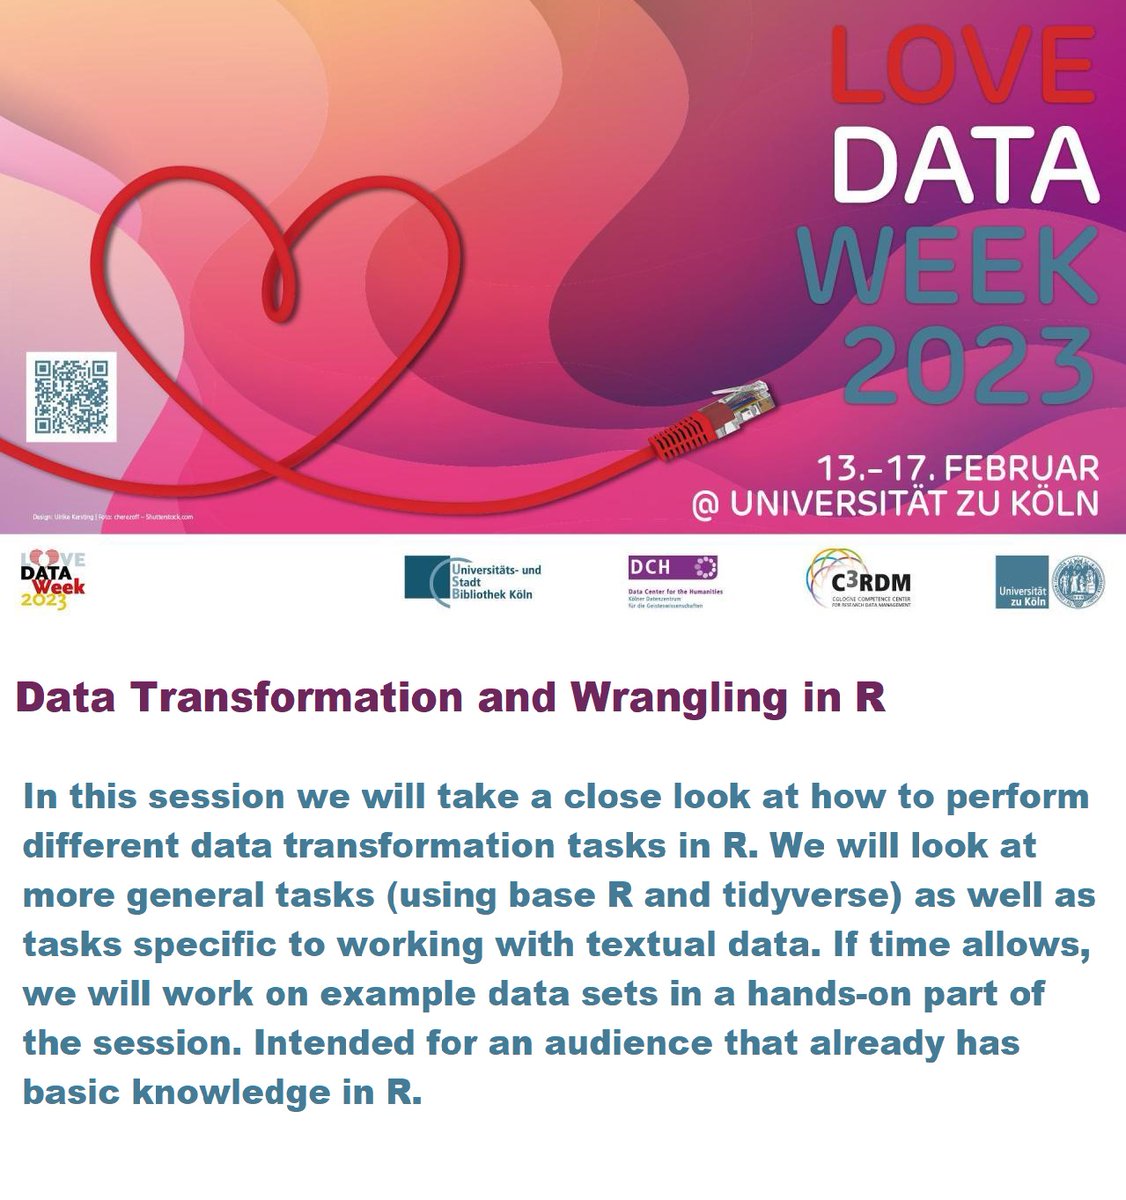 Happy to share that Max (Hörl) and I hold an online workshop on 'Data Transformation and Wrangling in R' on Tuesday, Feb 14, 14-16, as part of the International @LoveDataWeek. Registration is free, and open to everyone. #LoveData23 #FDM 
Link to register: uni-koeln.zoom.us/meeting/regist…